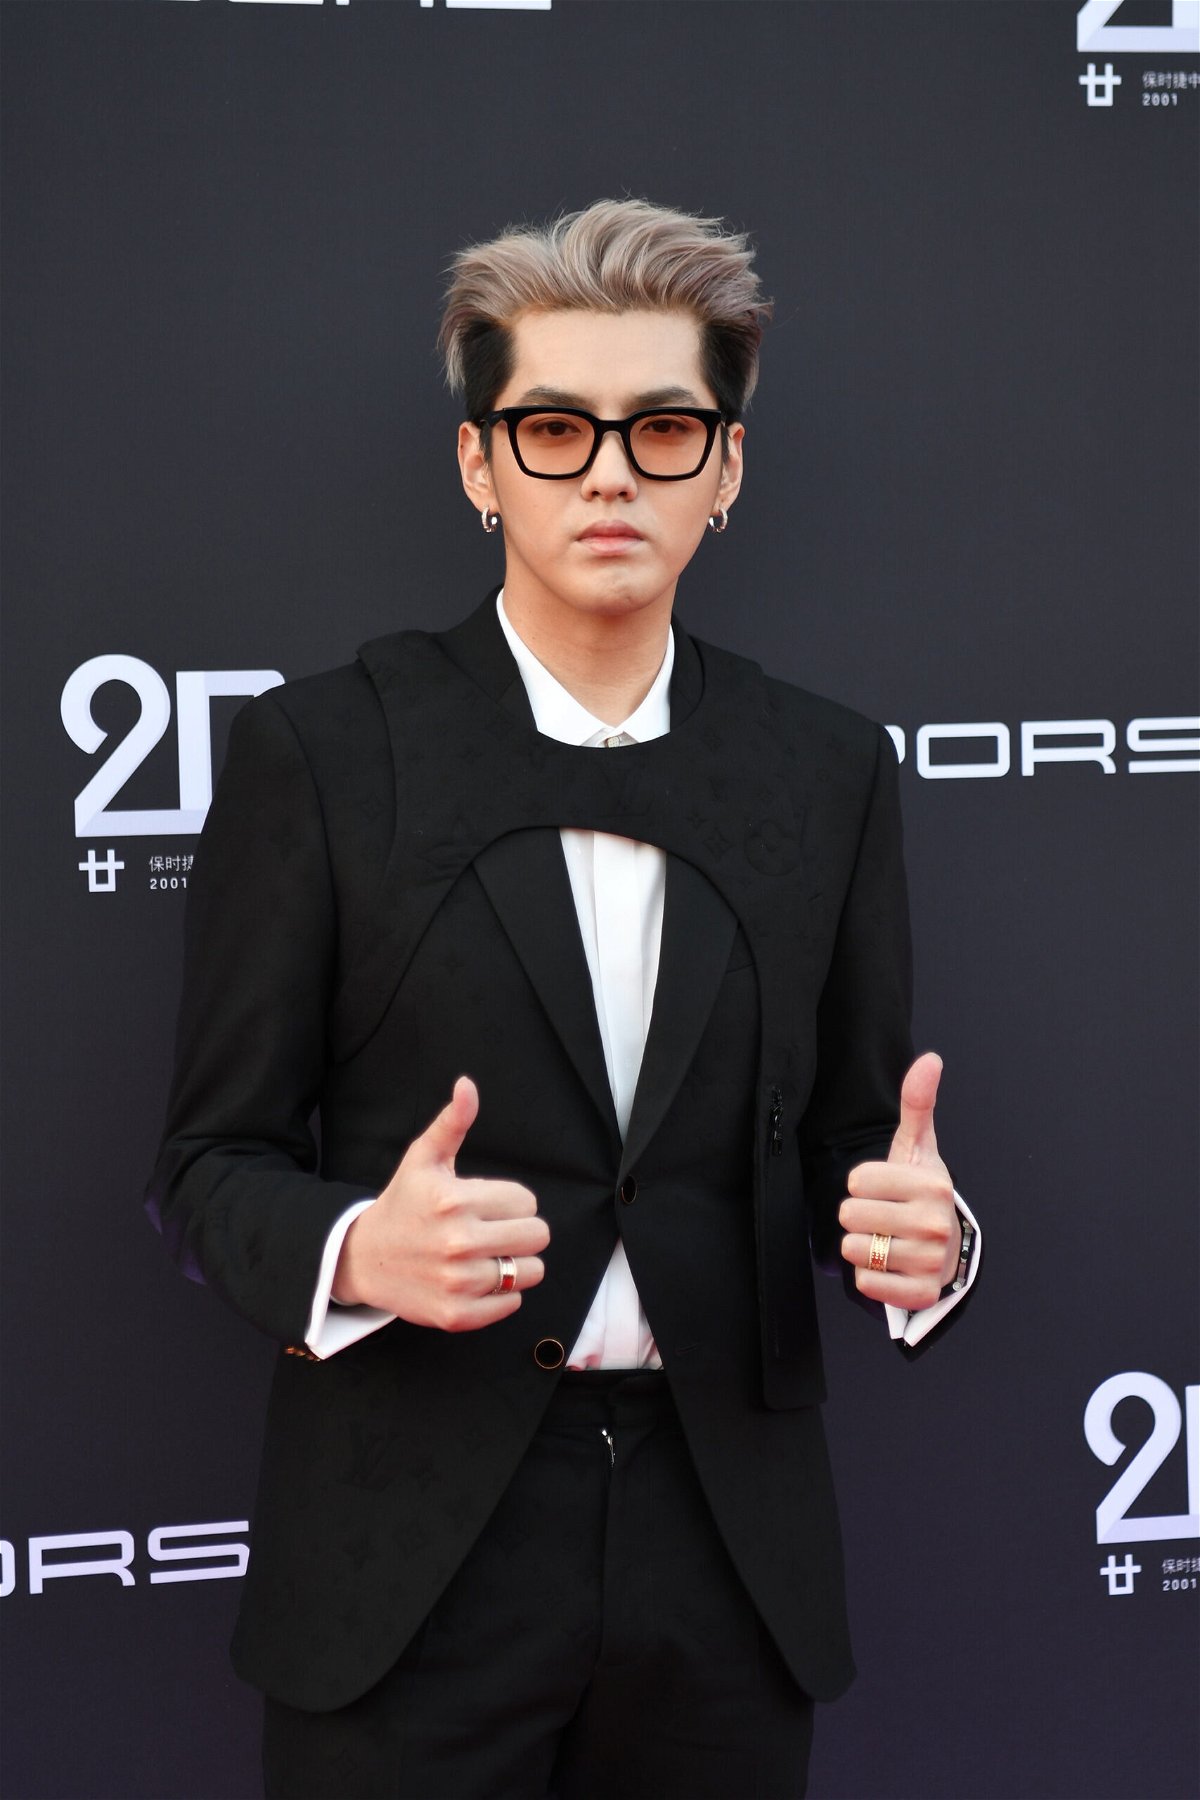 <i>Imaginechina/AP</i><br/>Kris Wu will be deported after he finishes his sentence